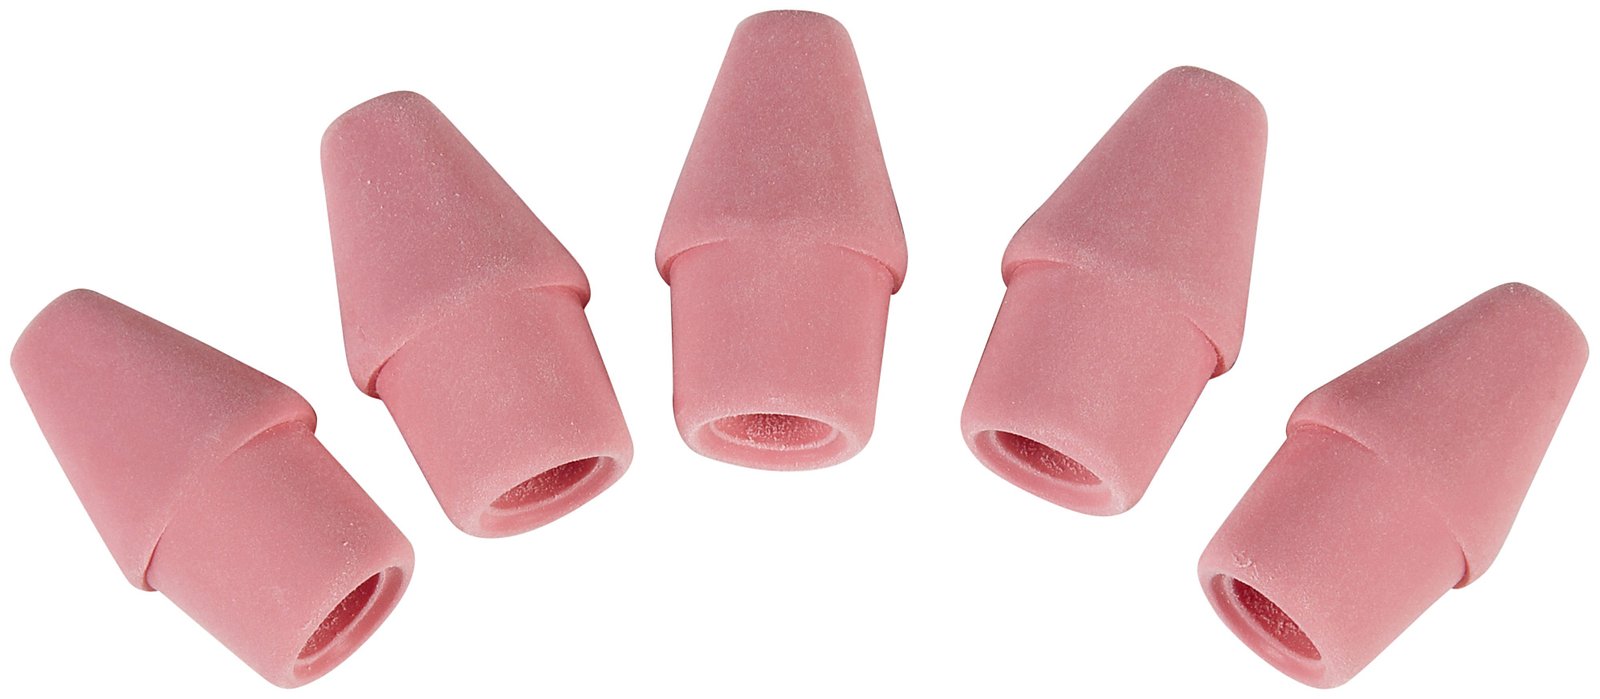 Paper Mate Arrowhead Pink Cap Erasers   Free Shipping